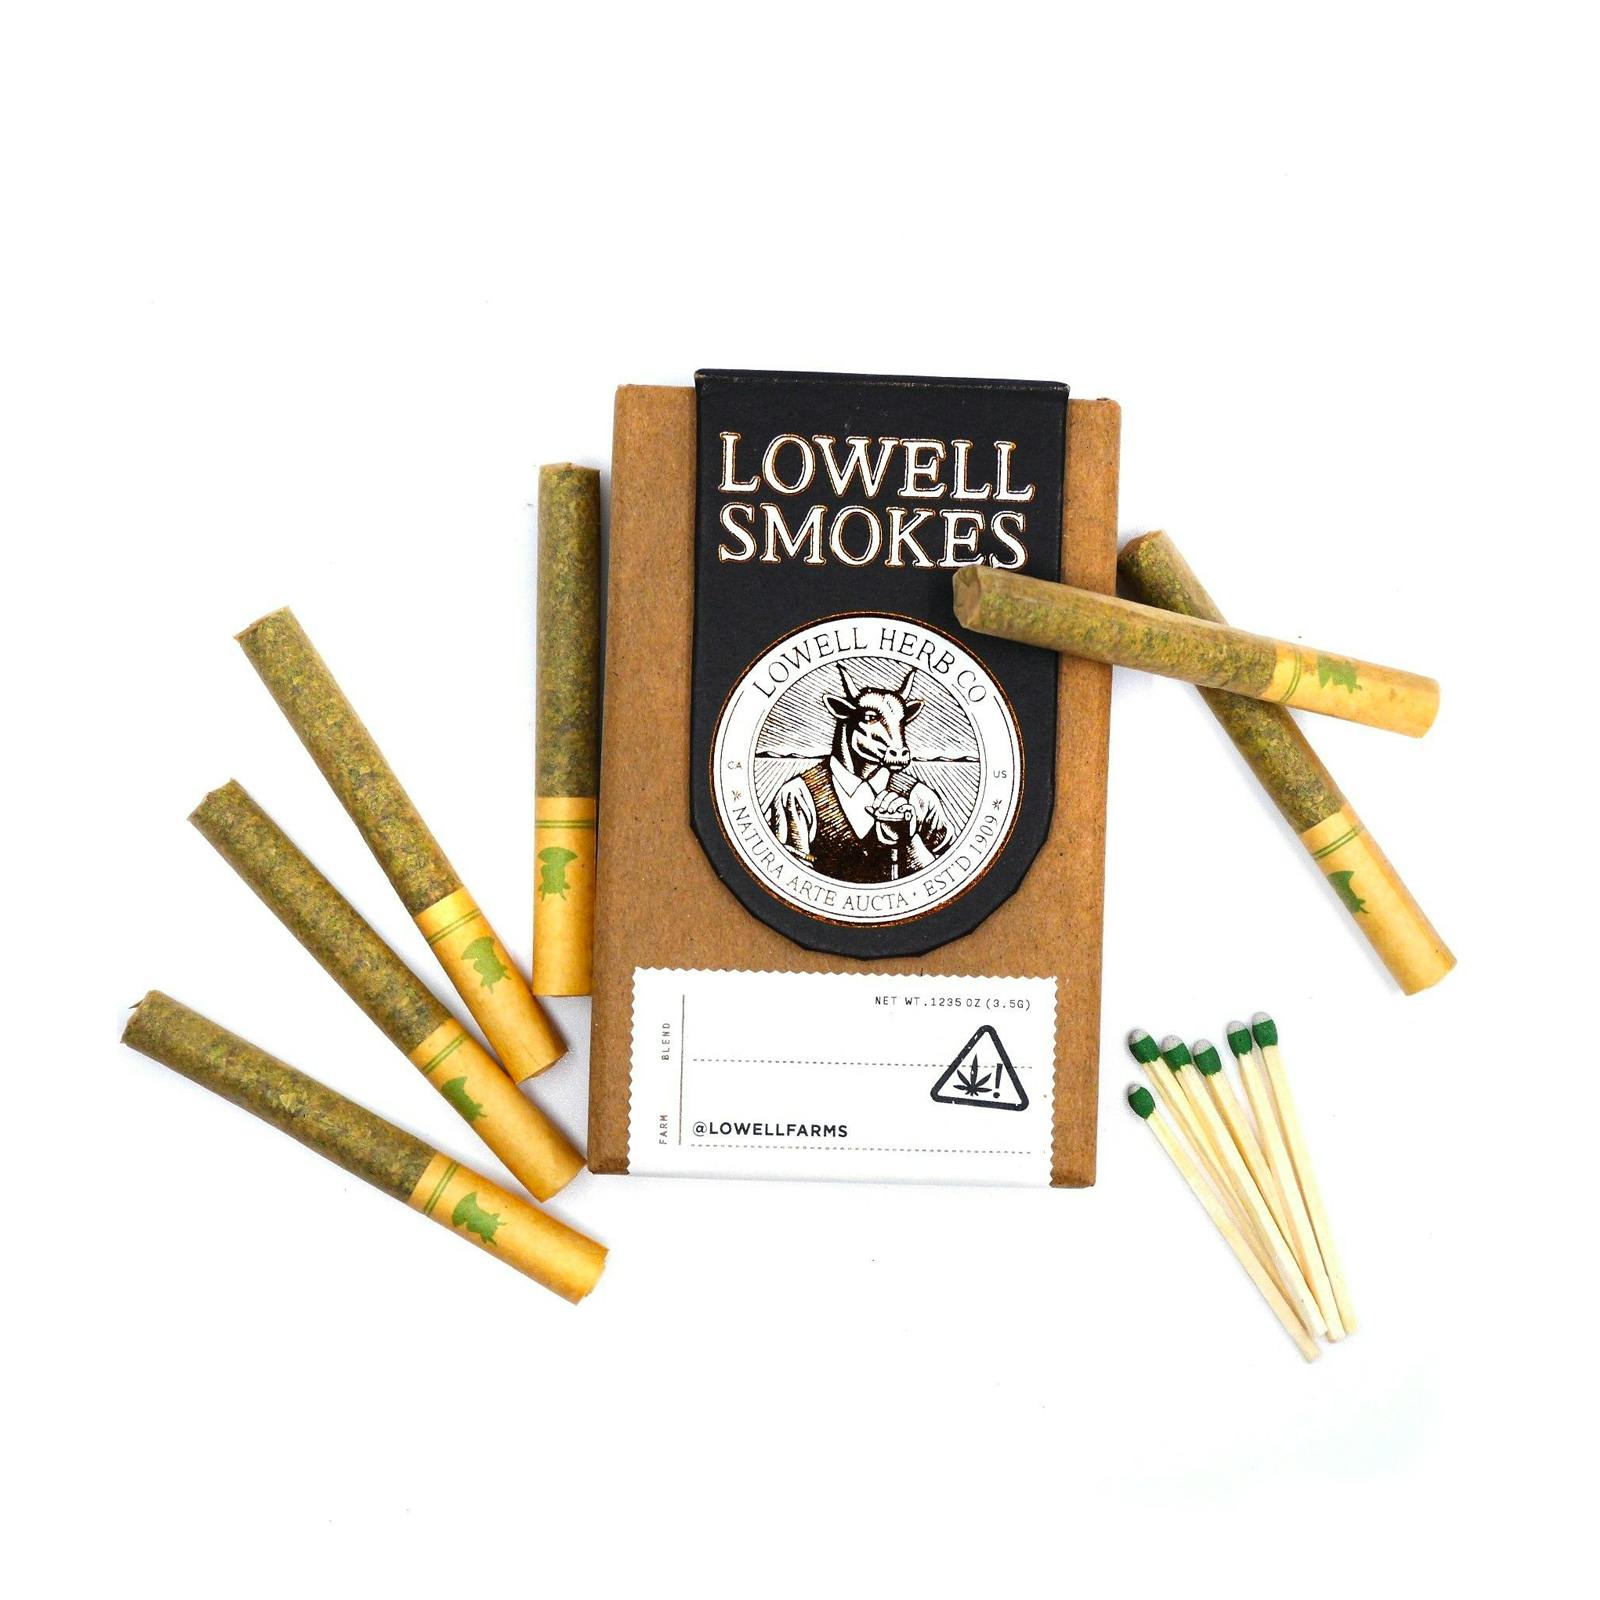 The Happy Hybrid Lowell Smokes 6 pack